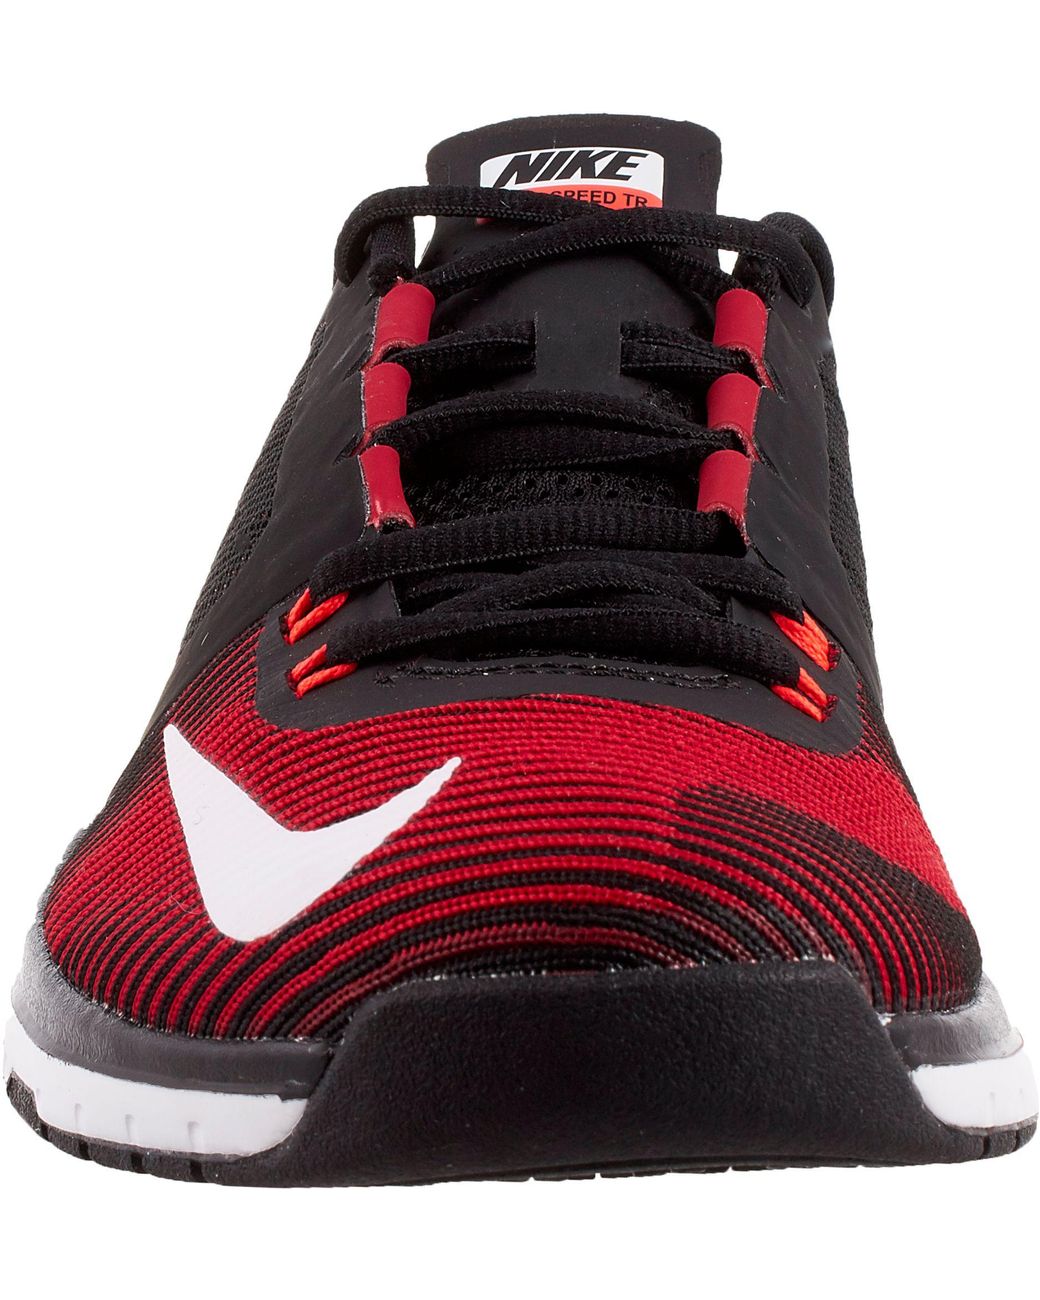 Nike Rubber Zoom Speed Tr 3 Training Shoes in Black/Red (Black) for Men |  Lyst